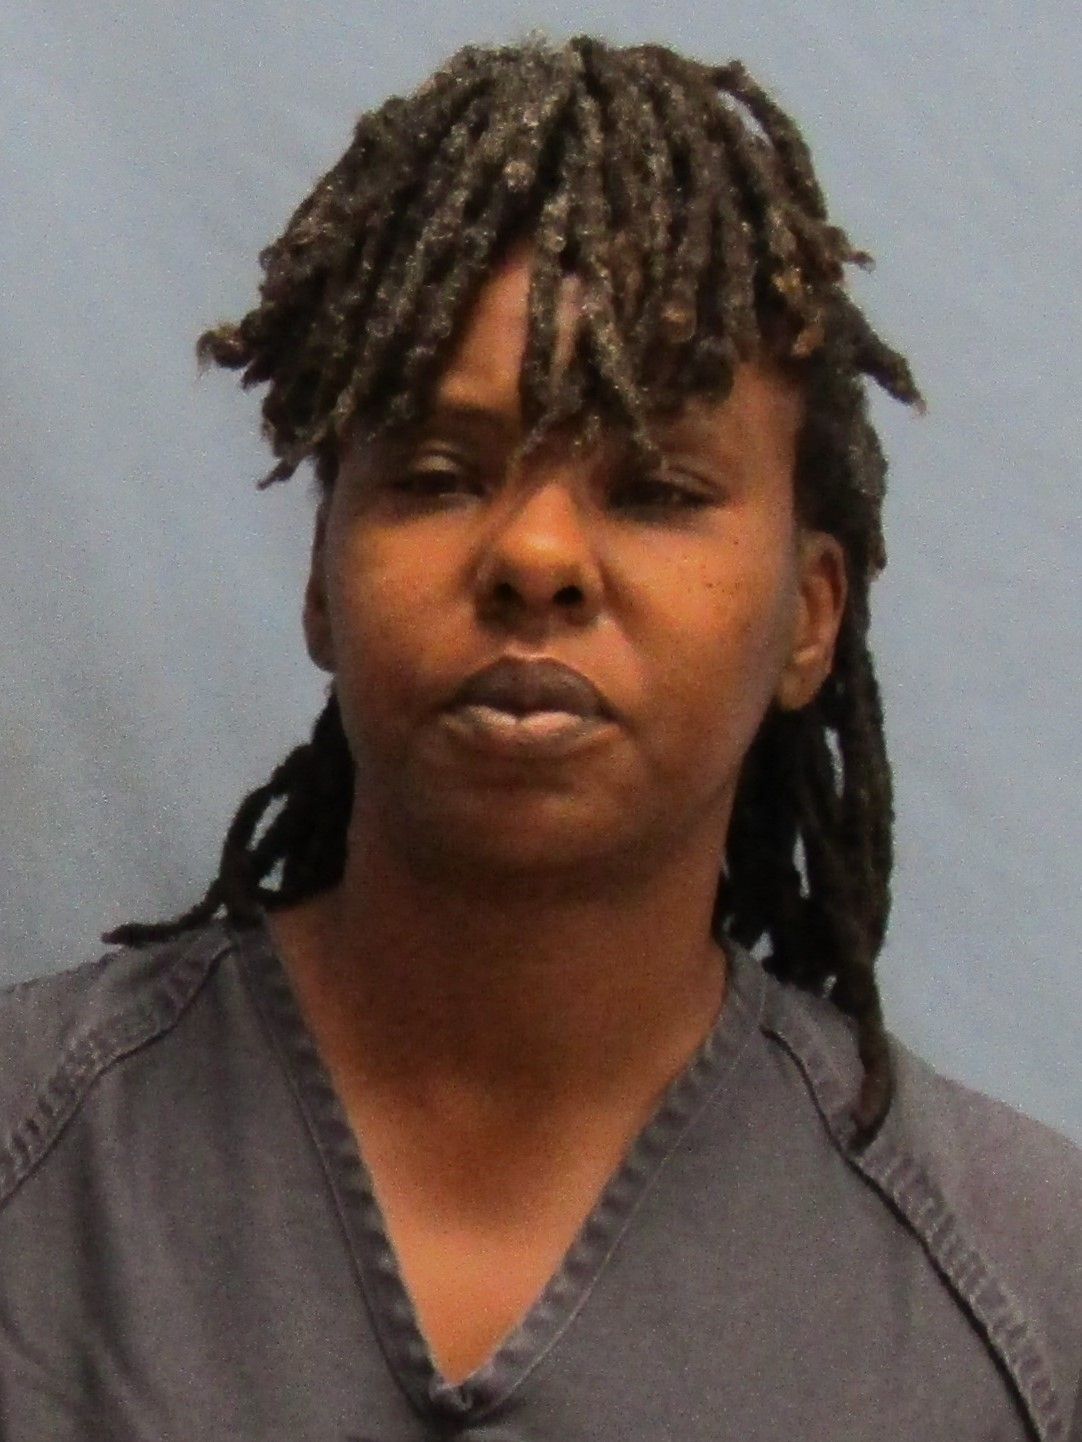 Oklahoma woman wanted on murder charge arrested in Arkansas